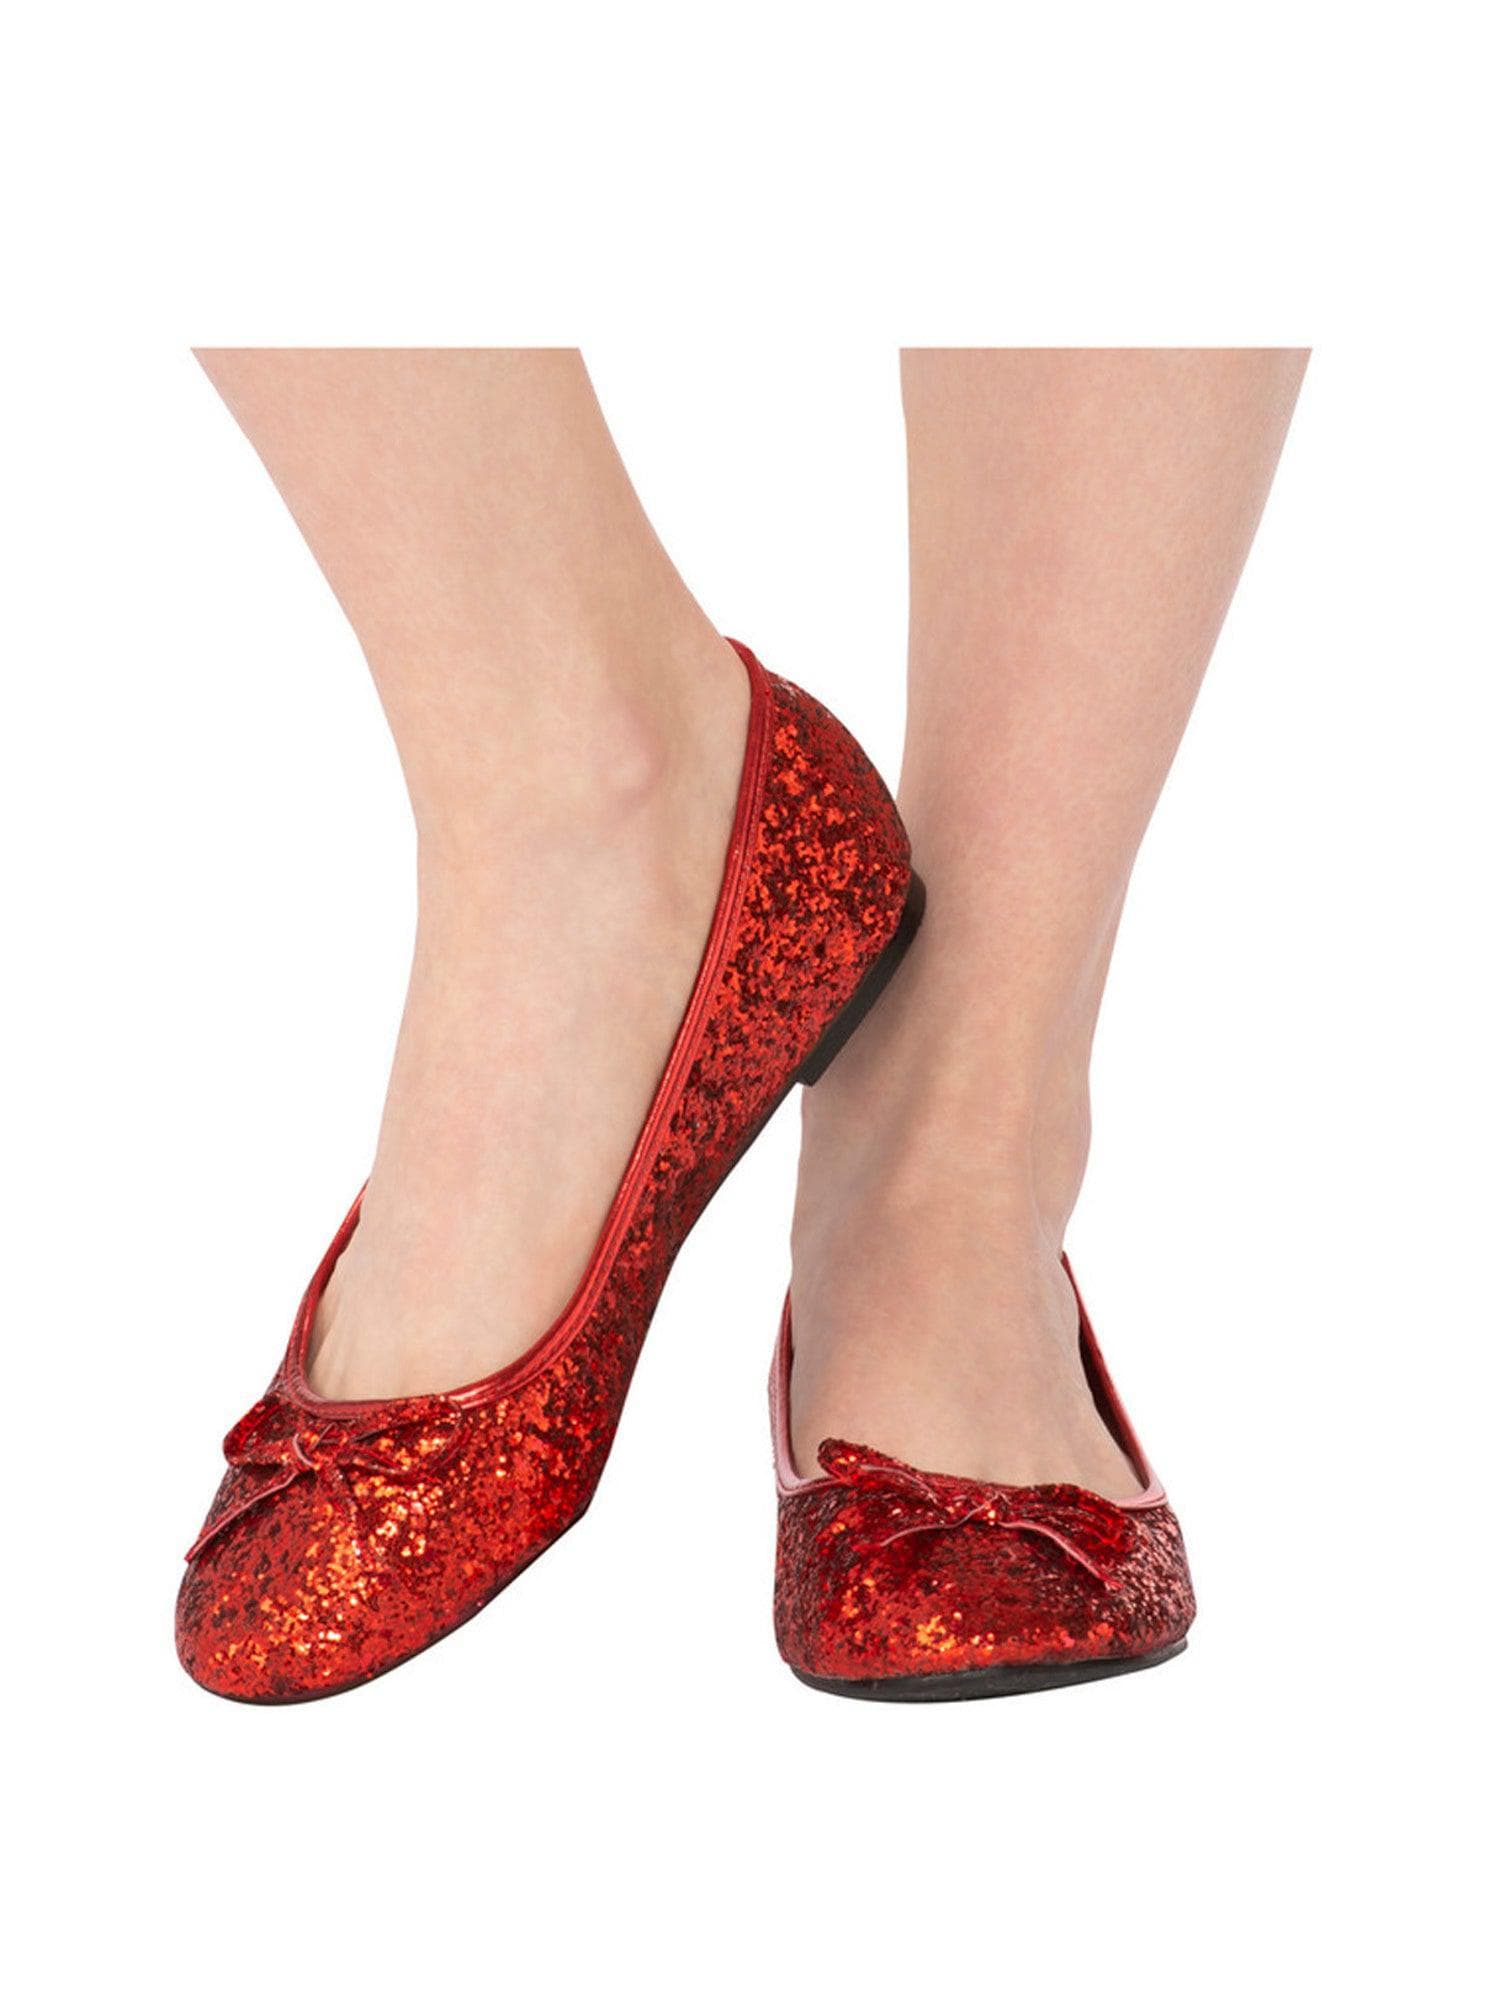 Adult Red Glitter Ballet Shoes - costumes.com